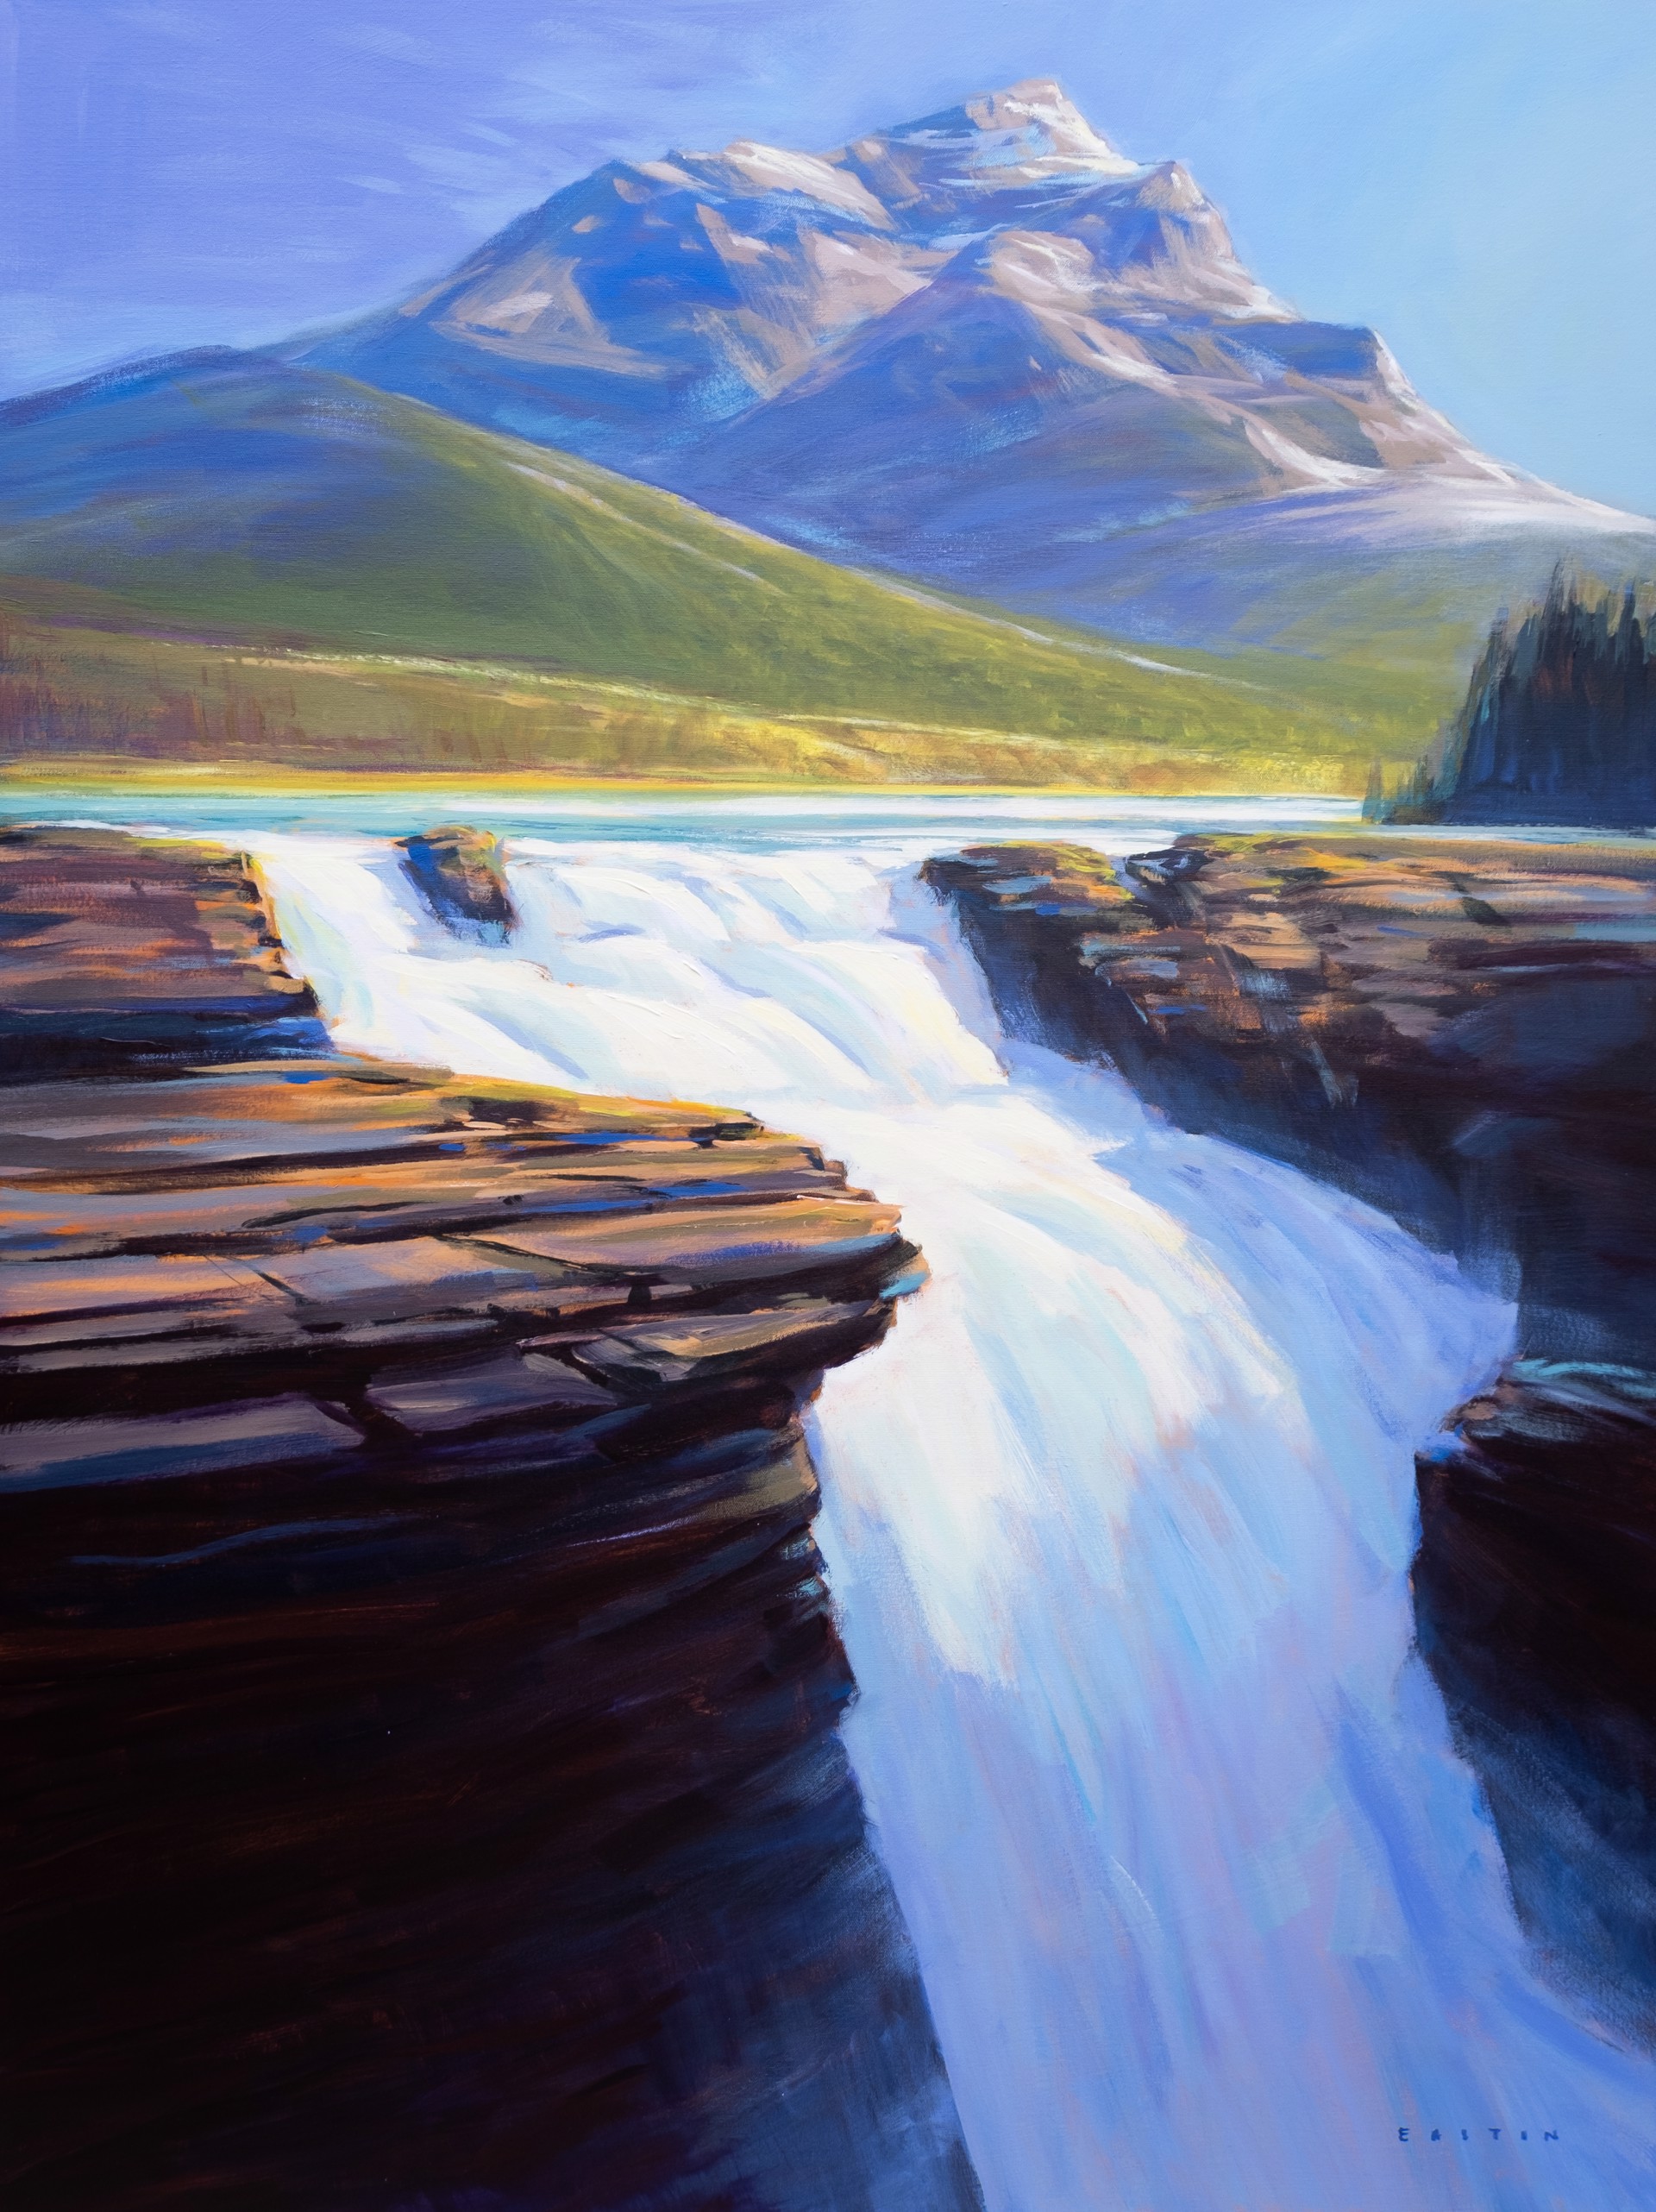 Athabasca Falls Afternoon Light by Charlie Easton